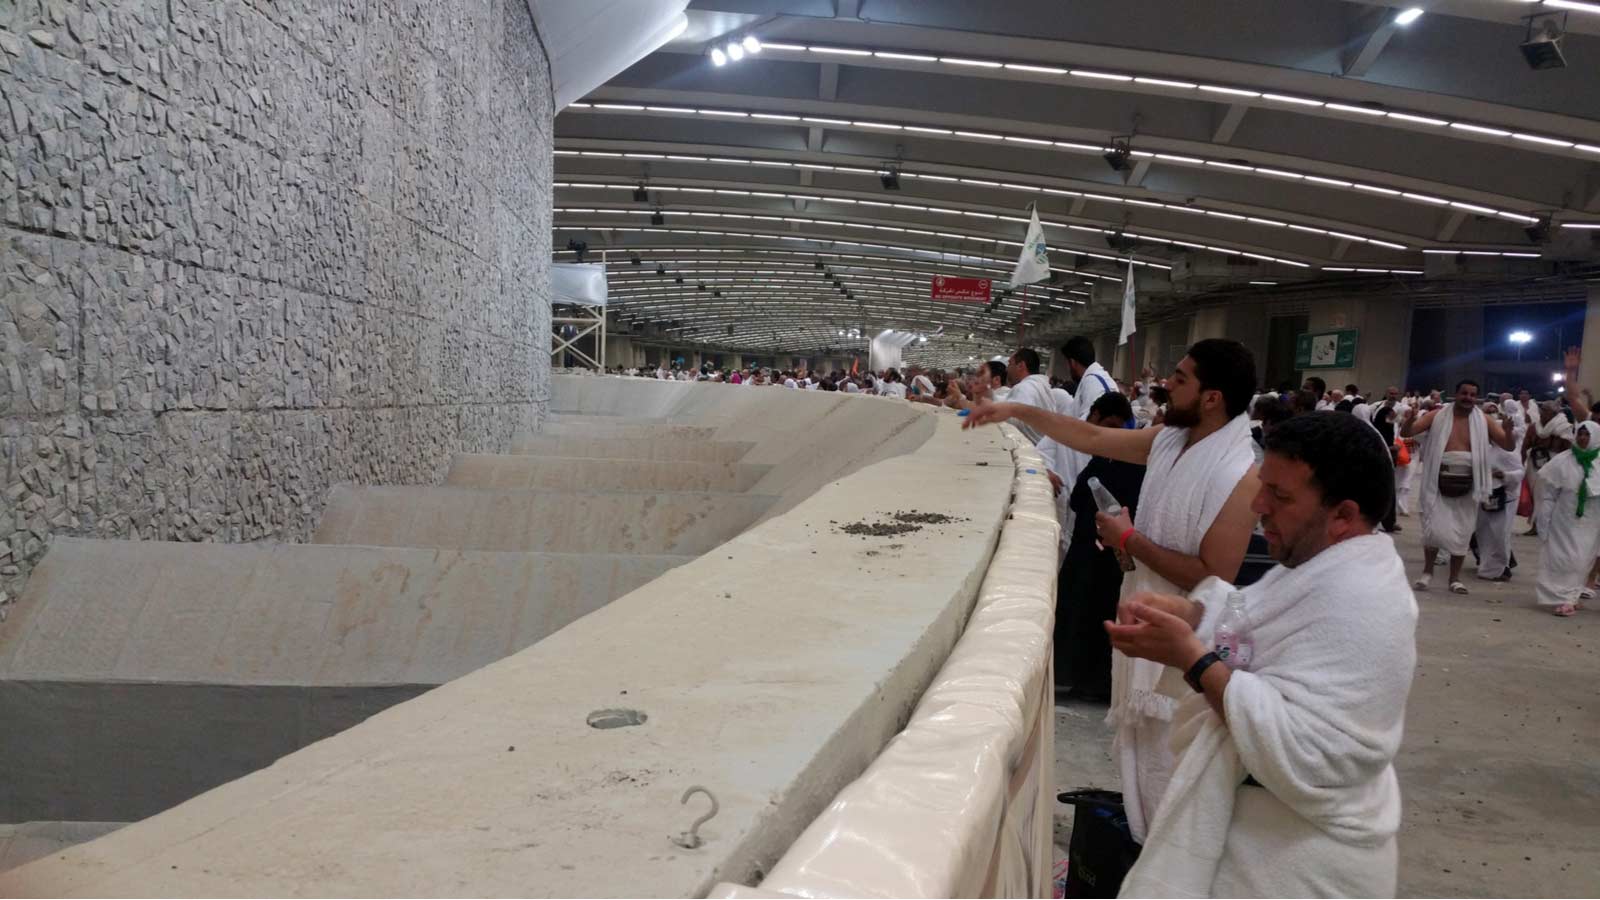 Throwing of the Pebbles in Hajj: When Is It Done?